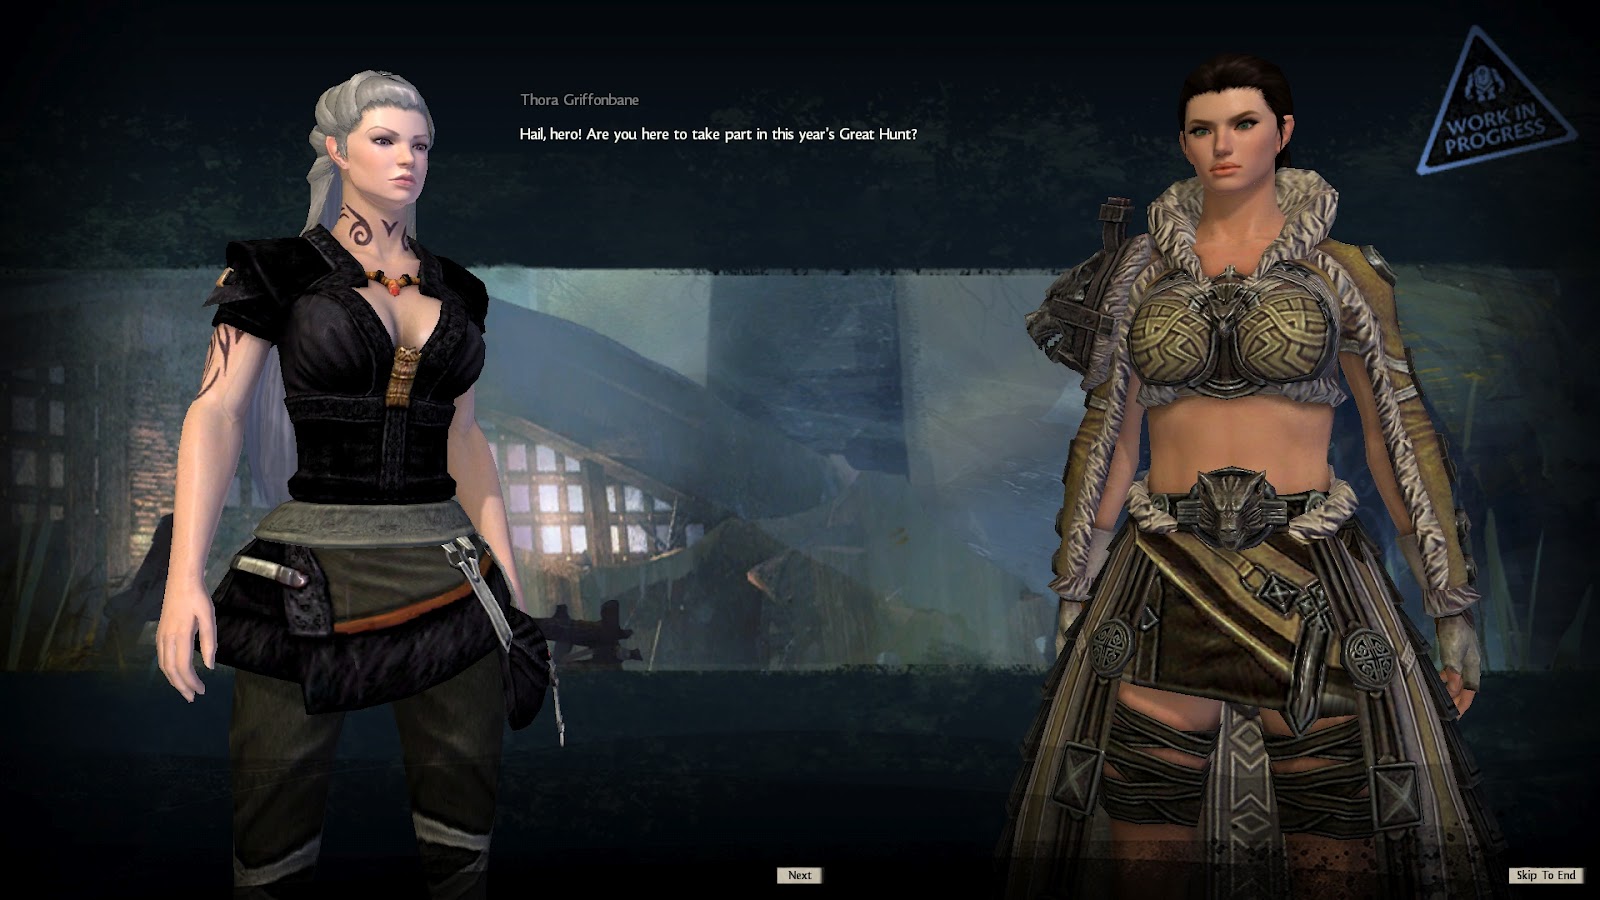 Anyway, I decided to play a Norn Thief (that's me on the left). 